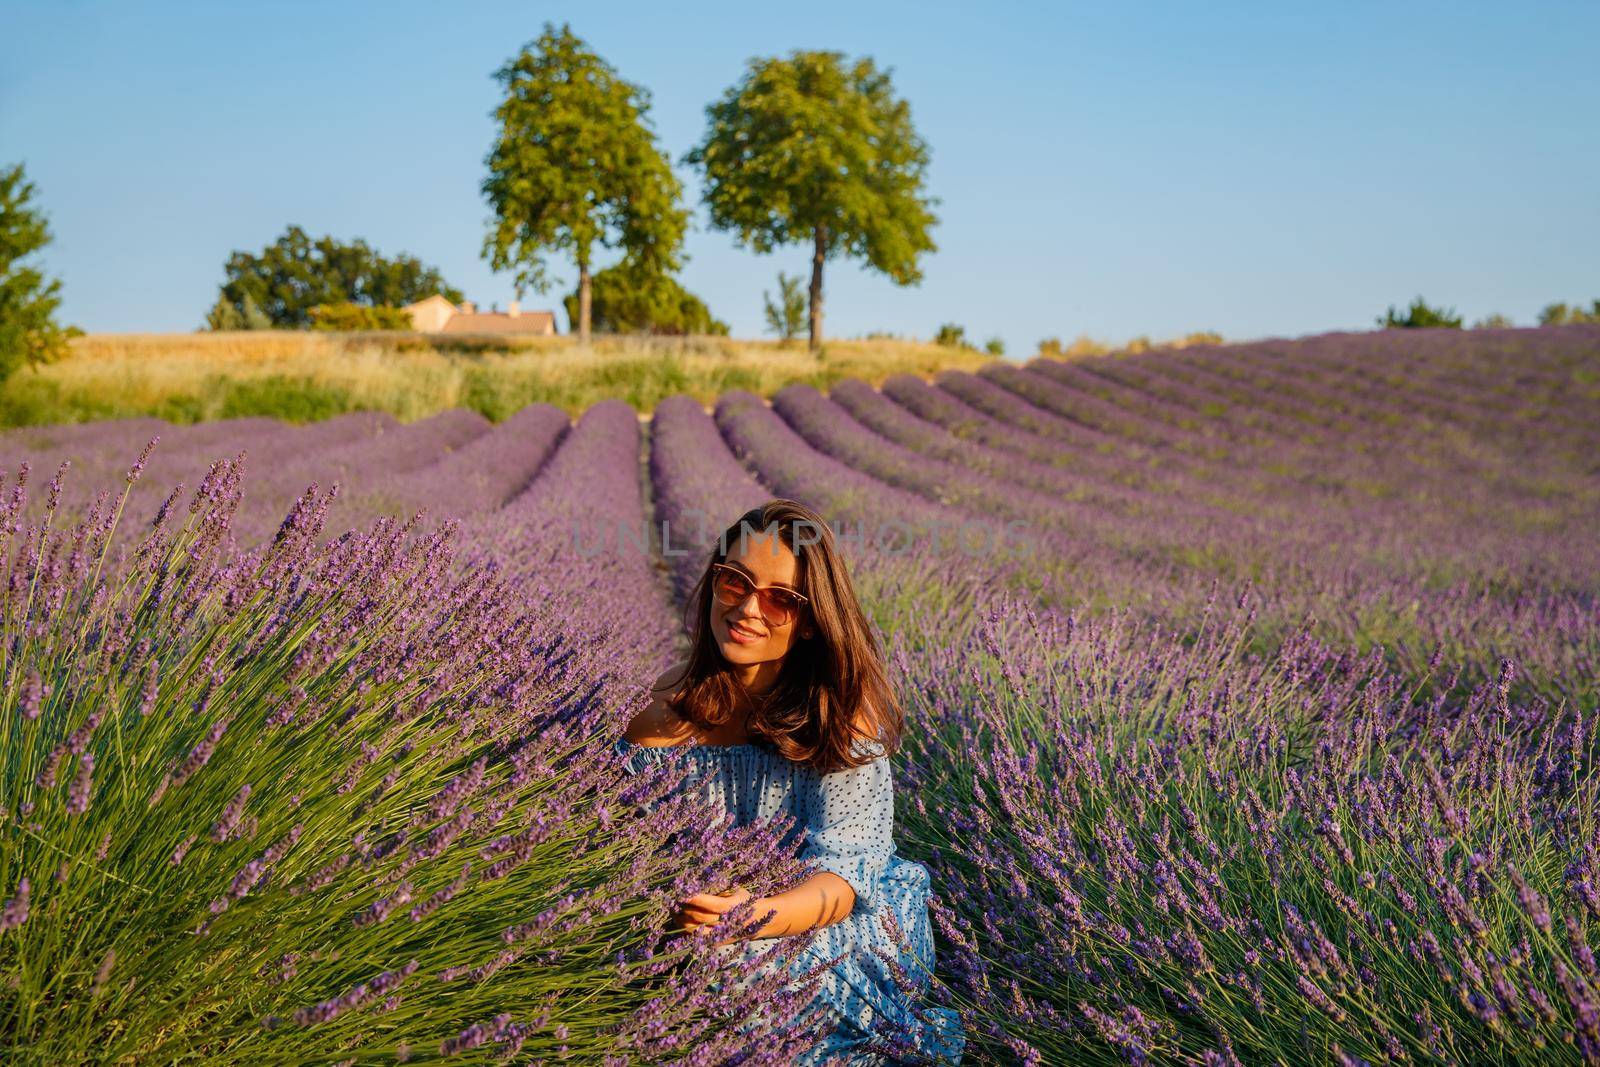 The beautiful young girl in a blue dress sits on the field of a lavender flowers, long curly hair, bright smile, a house of the gardener, trees, perspective of a lavender. High quality photo